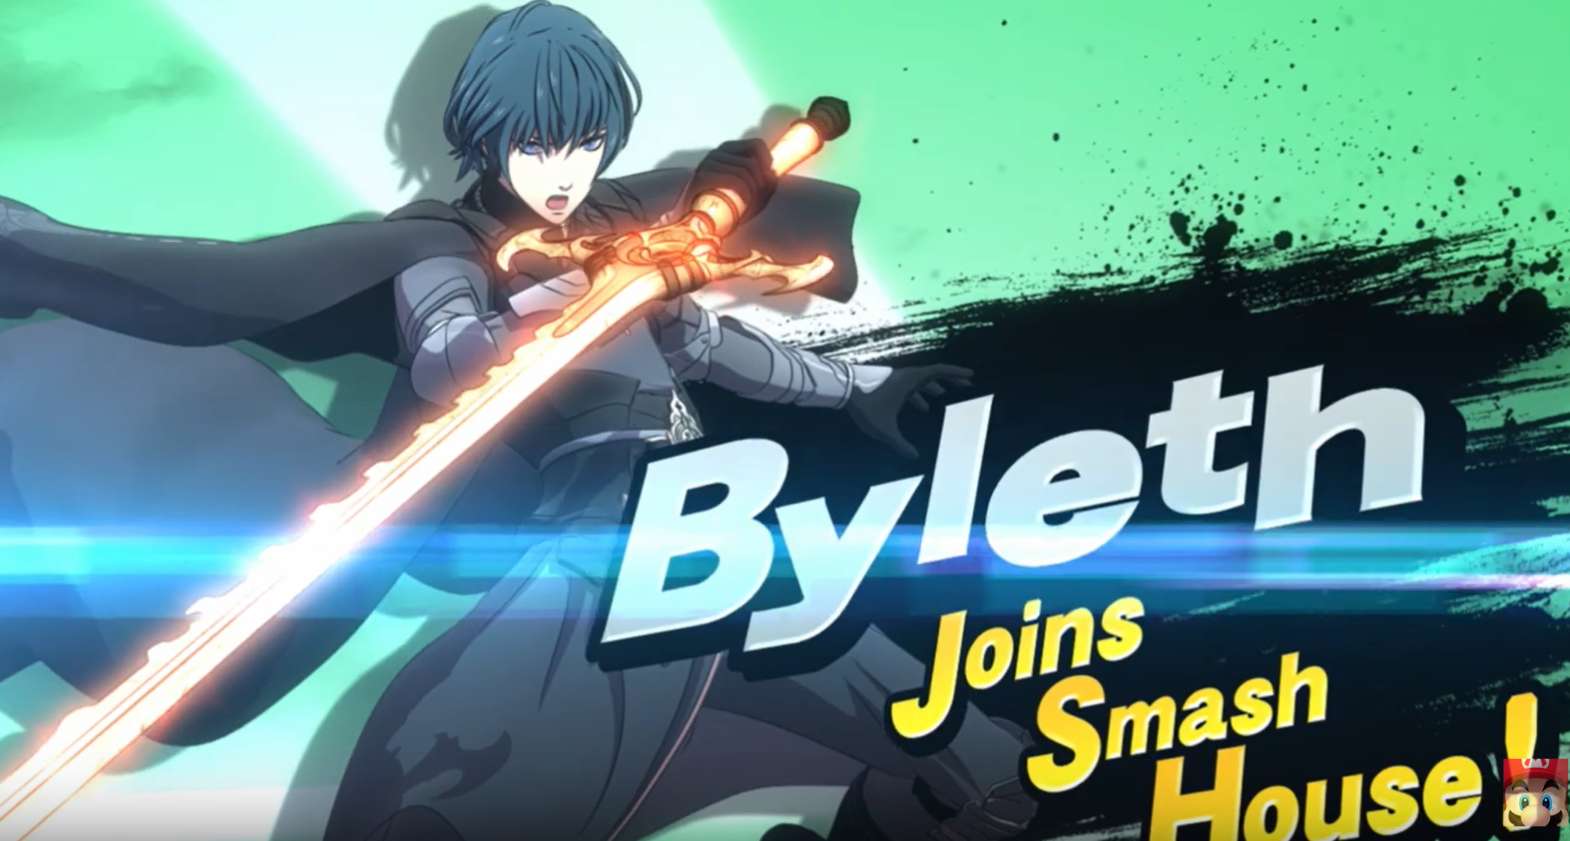 Byleth DLC Character Released For Super Smash Bros. Ultimate With Large 7.0 Update